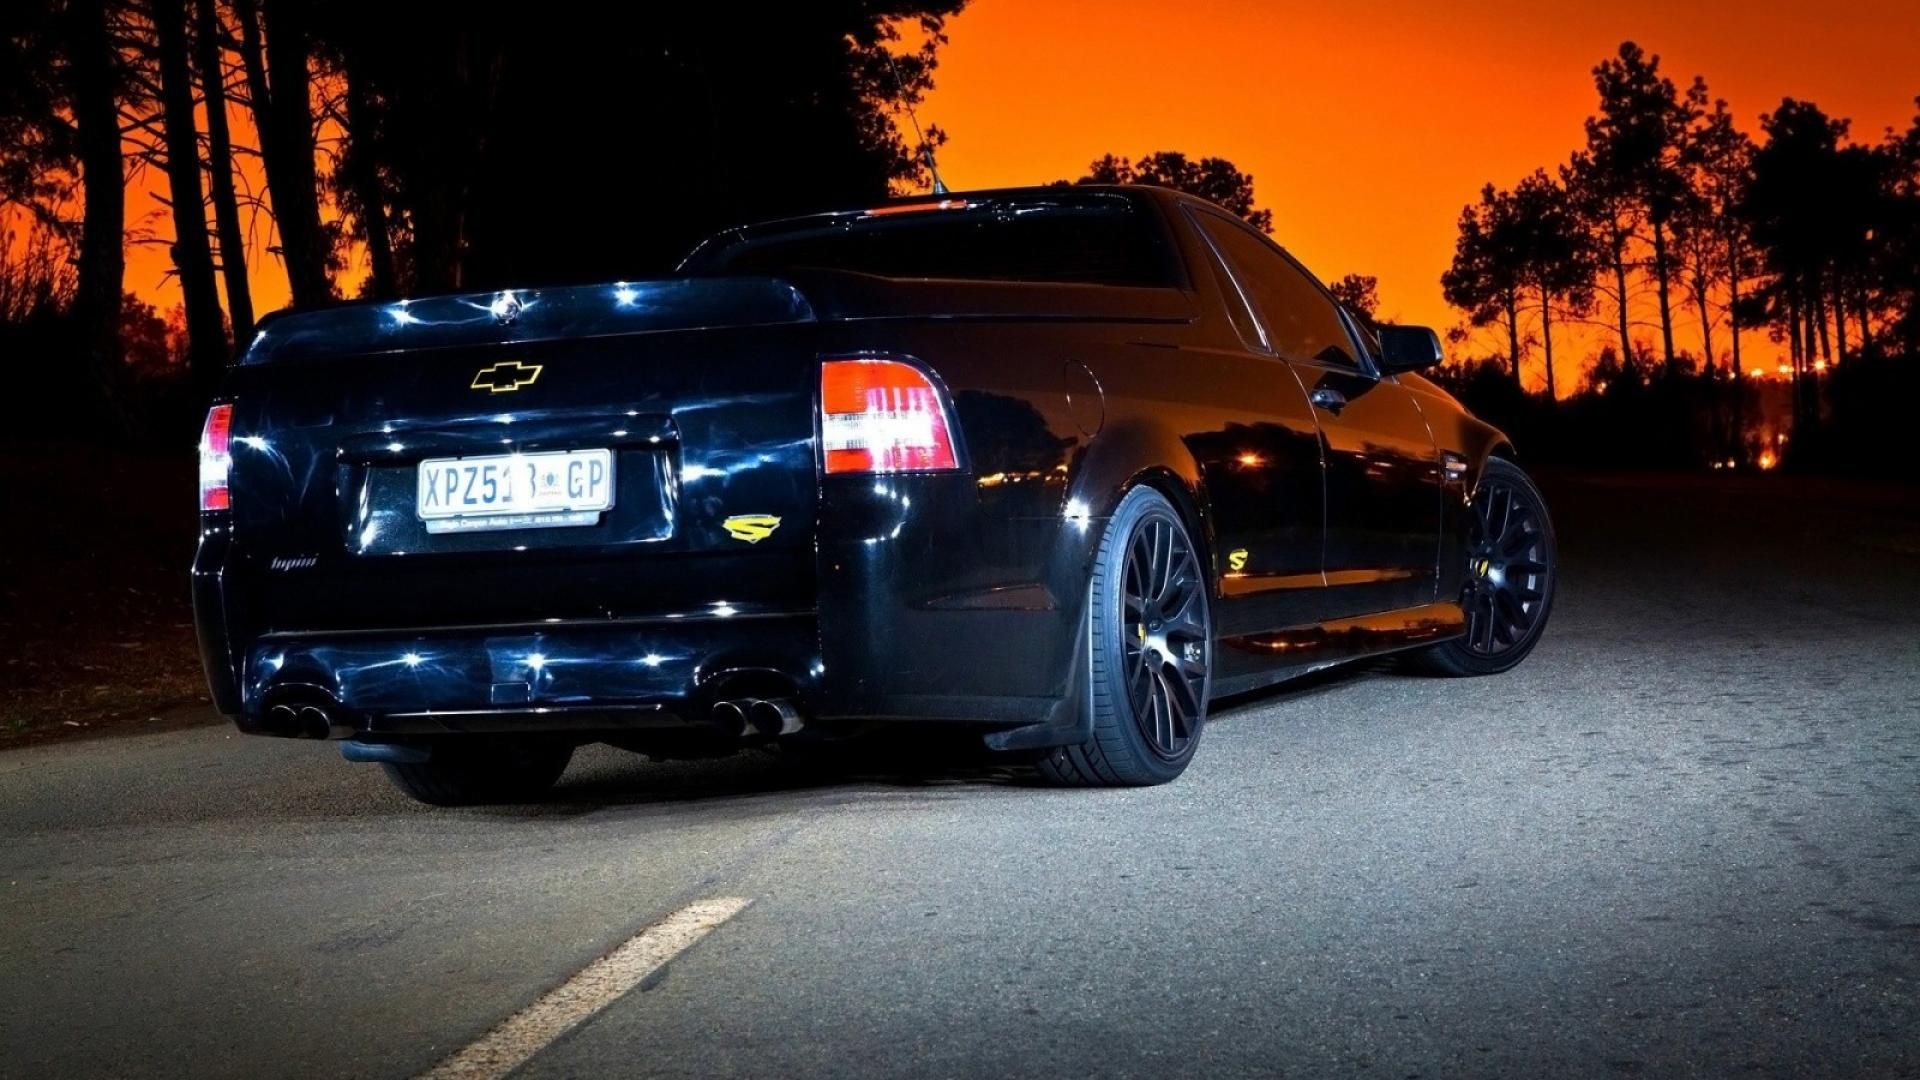 SICK!!. Chevrolet, Chevy, Holden commodore